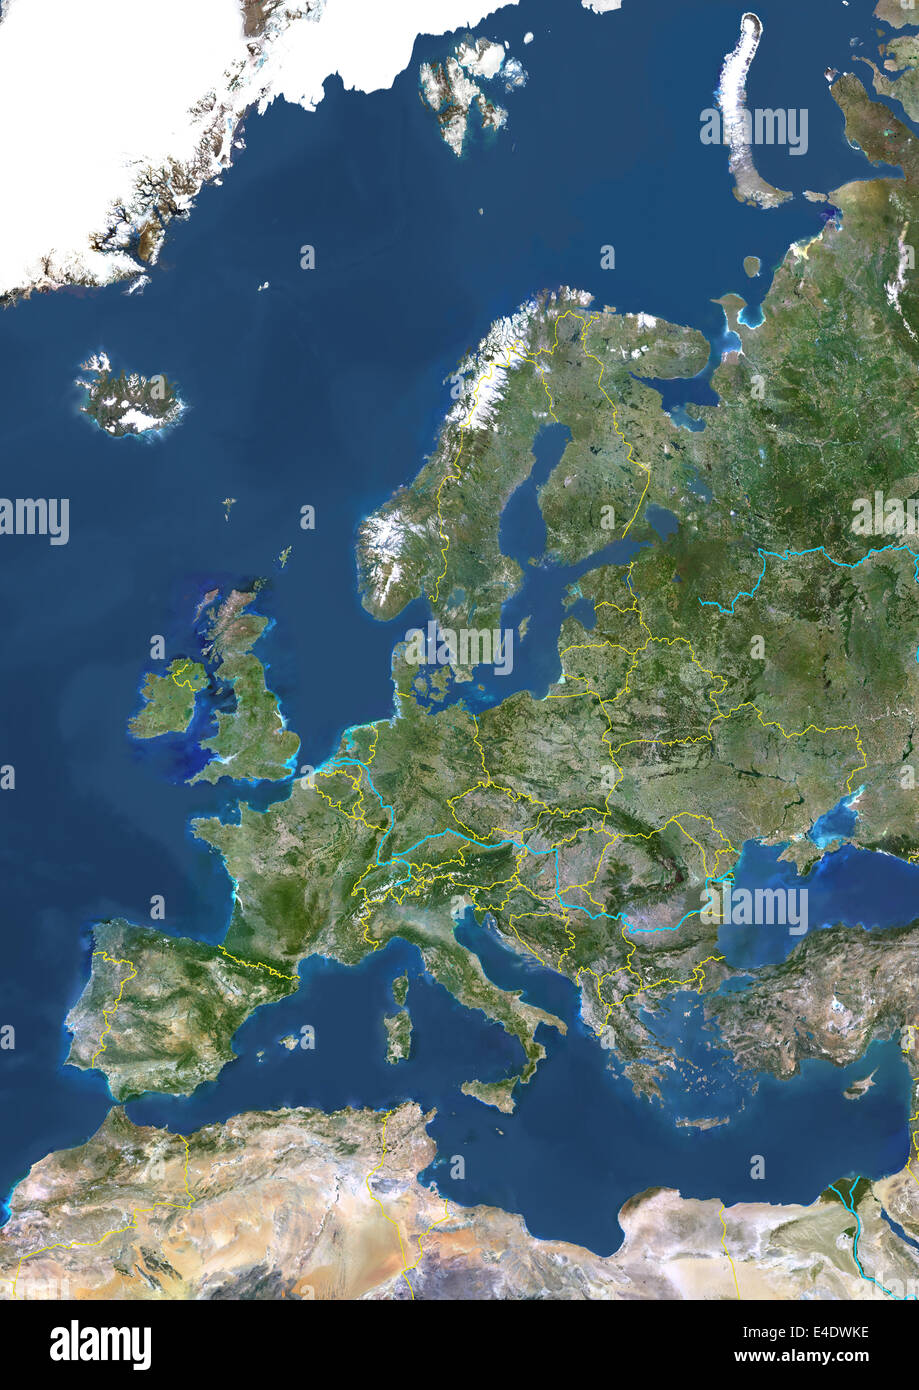 Europe With Country Borders And Major Rivers, True Colour Satellite Image. True colour satellite image of Europe with country bo Stock Photo